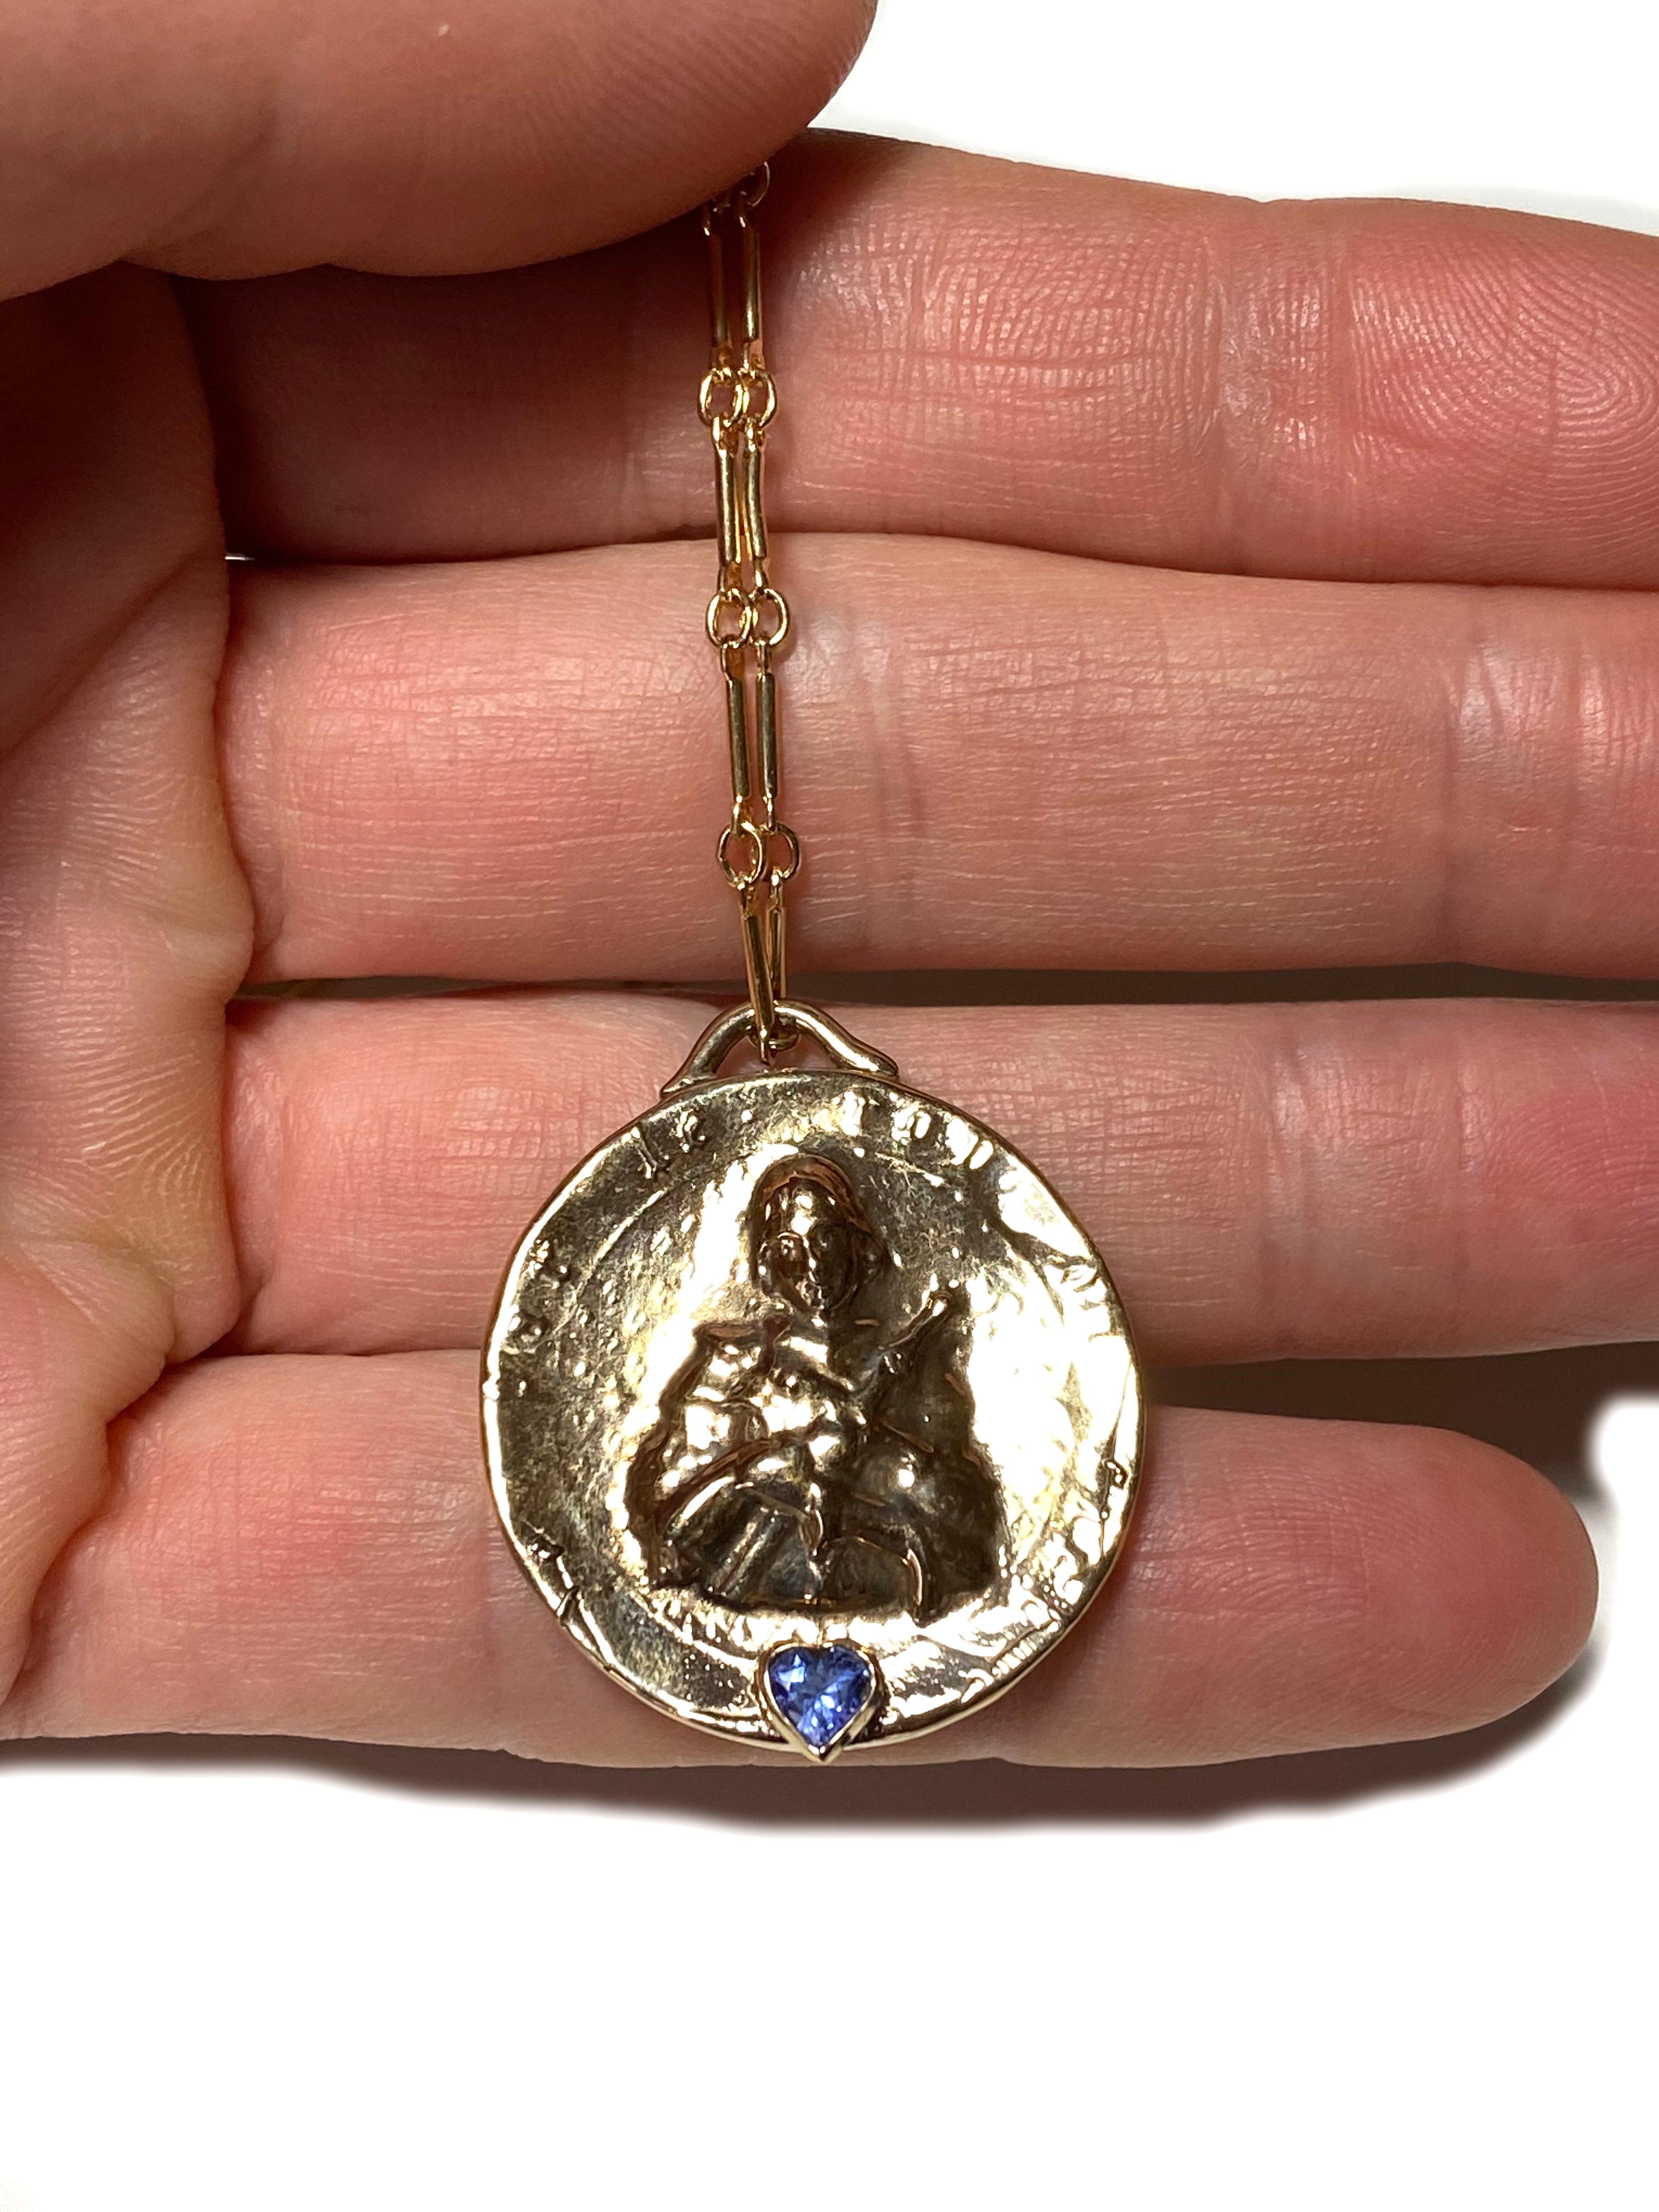 Heart Joan of Arc Medal Coin in Bronze Necklace Tanzanite Gold Filled Chain J Dauphin

Exclusive piece with Joan of Arc Medal pendant in Bronze with a Tanzanite Heart and a gold filled Chain. Necklace is 24